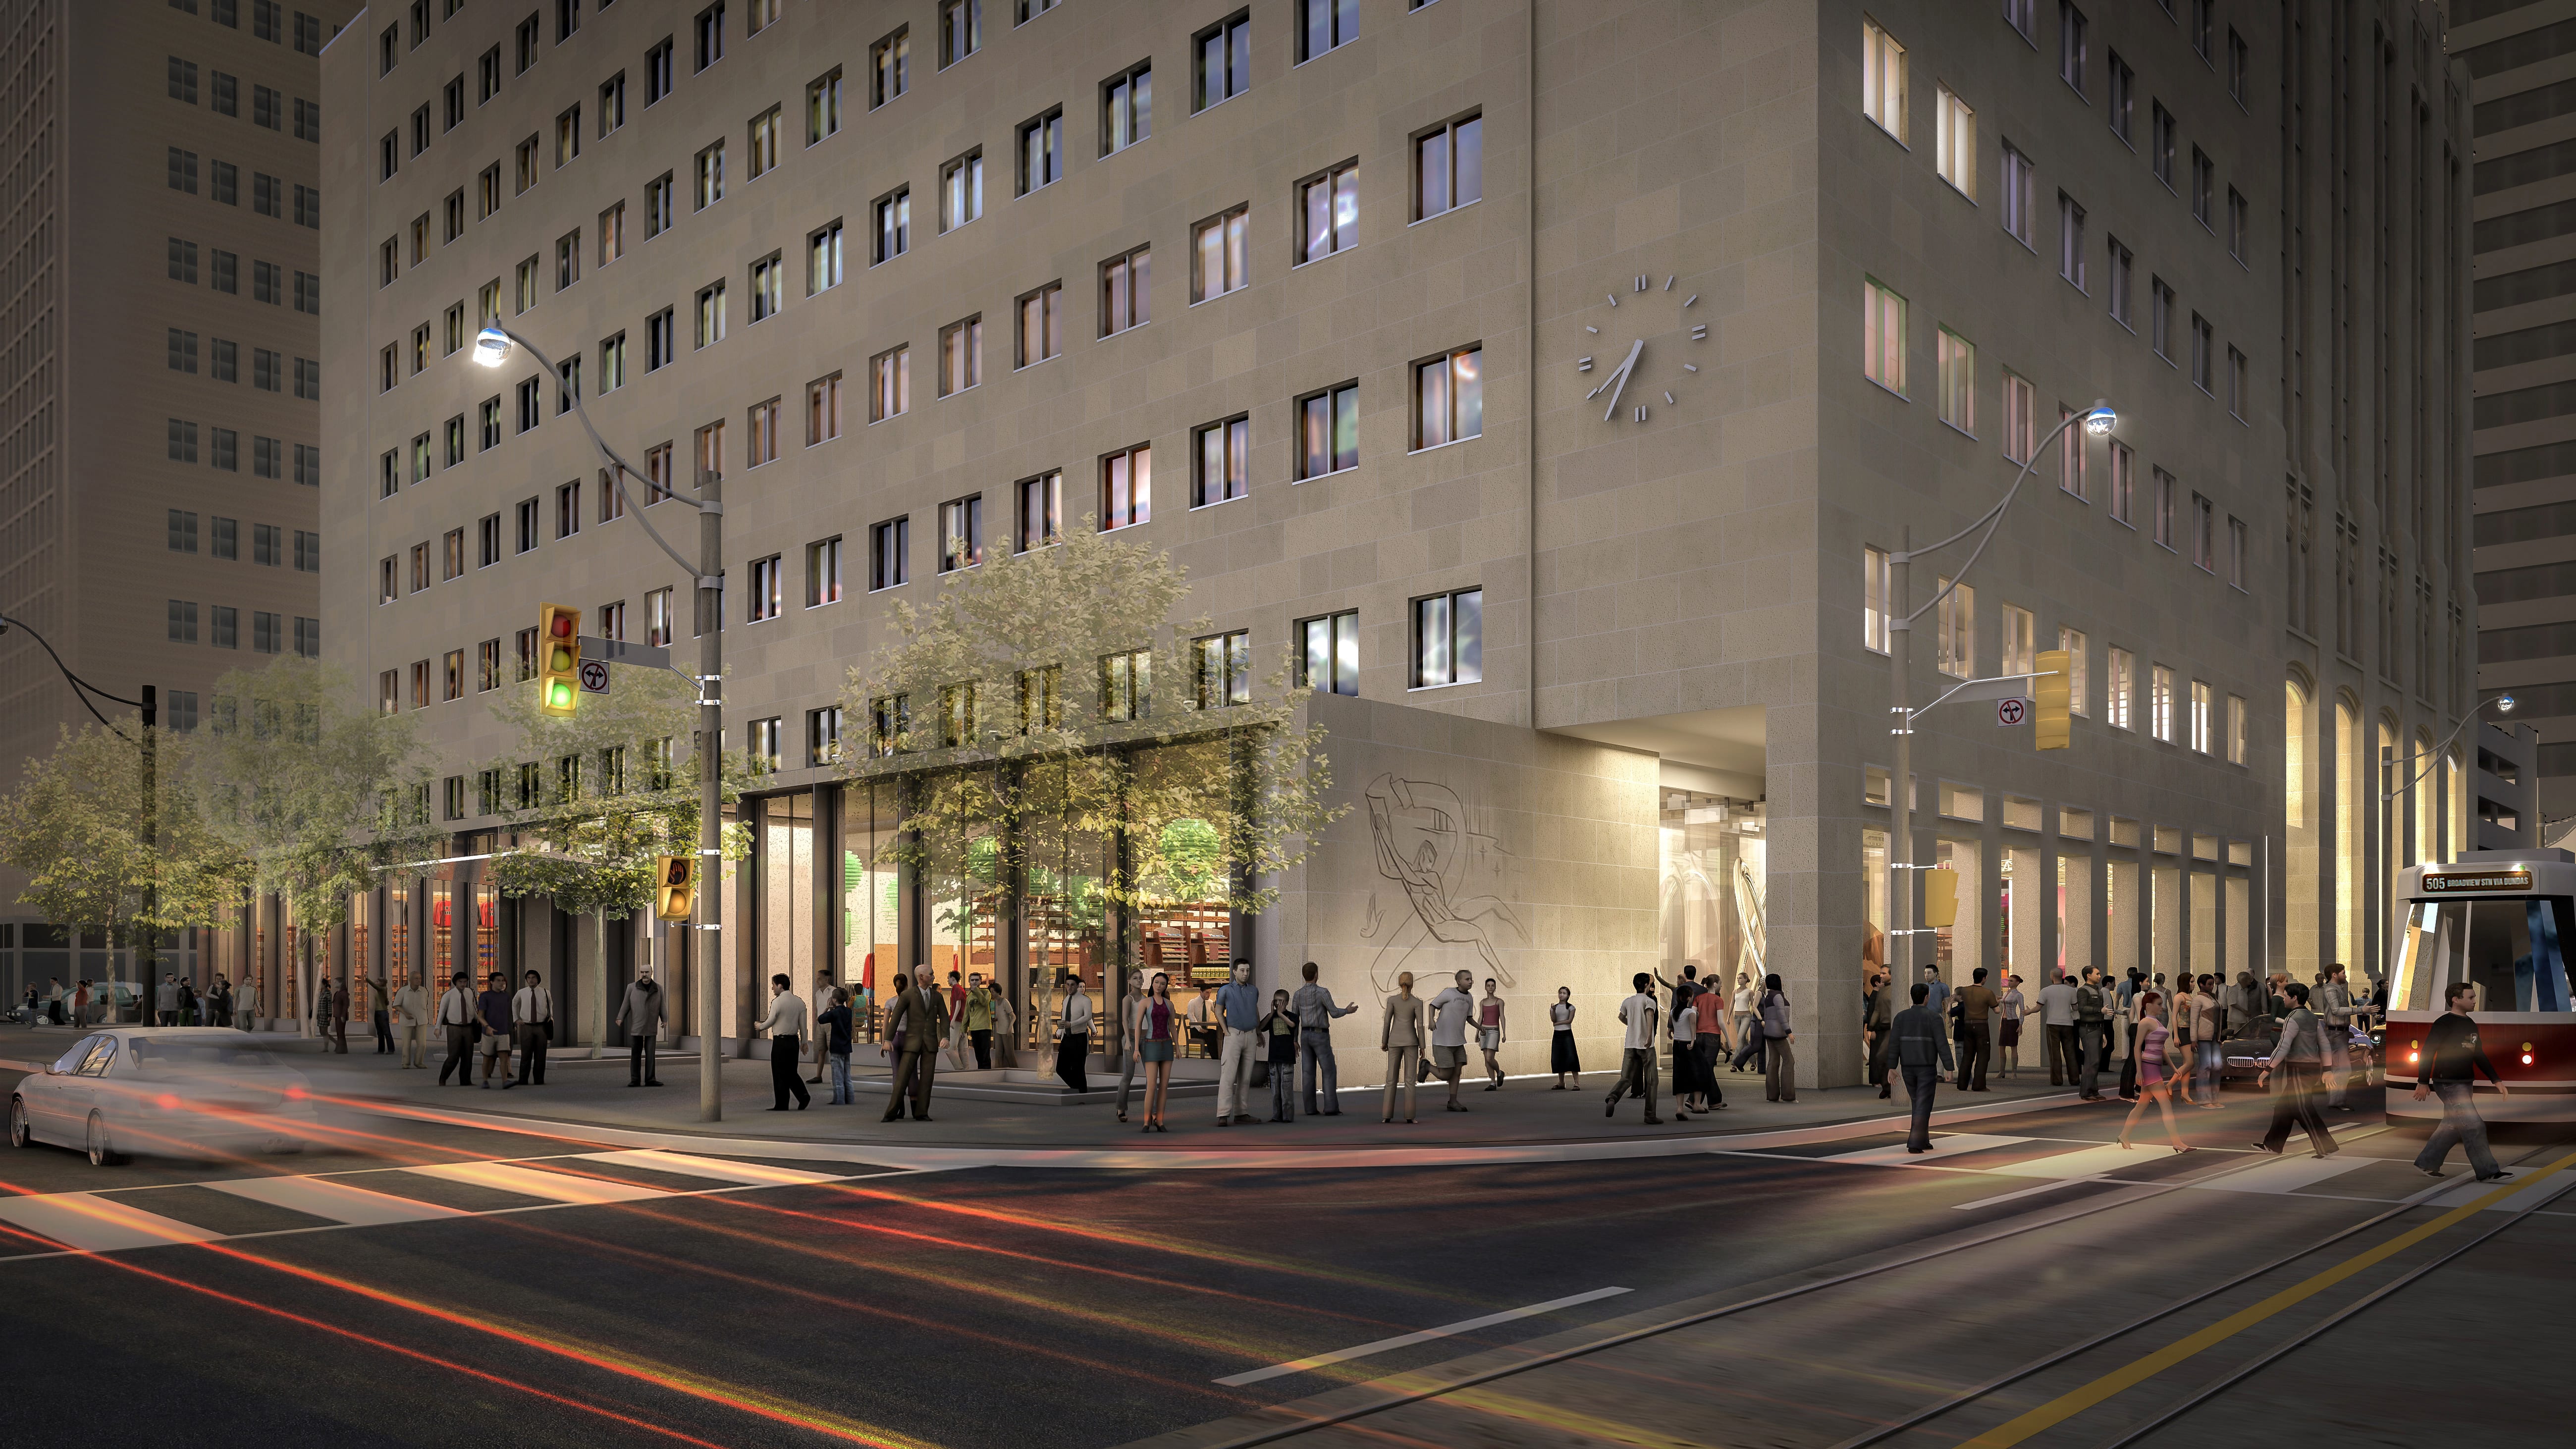 Rendering of streetscape featuring people walking across a road and public transit passing through.